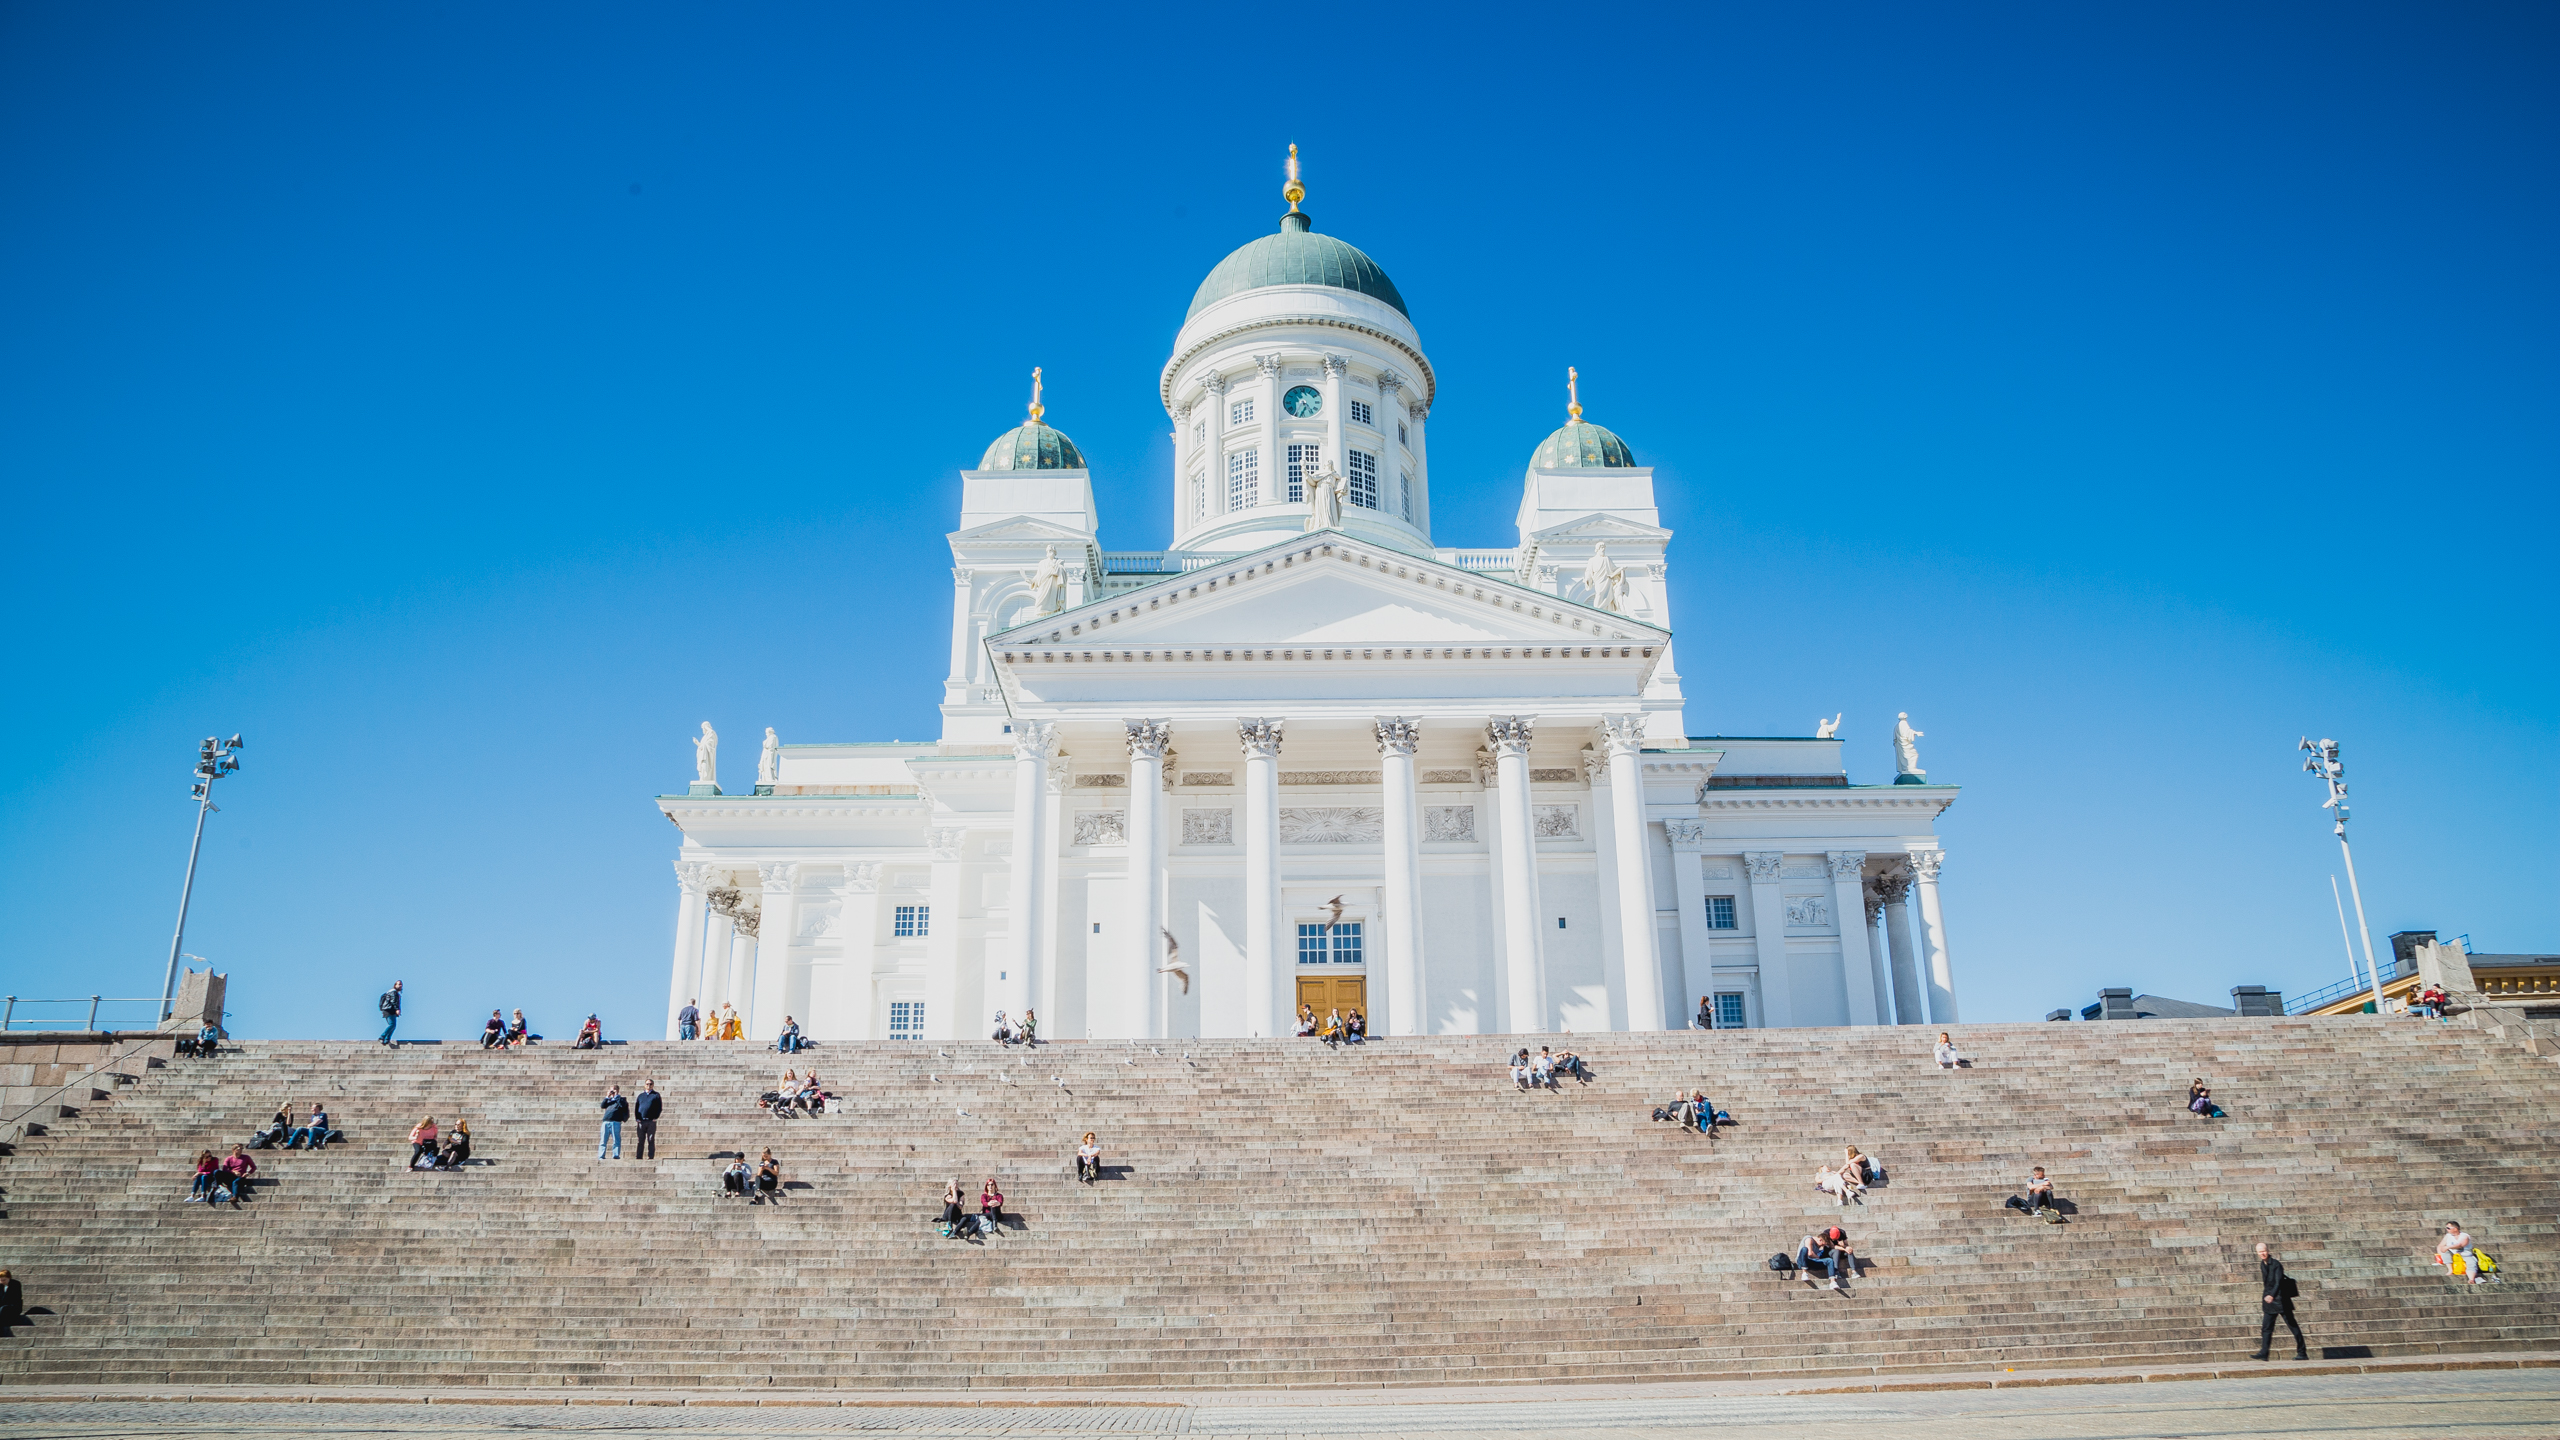 Photo of a monumental building in Helsinki, Finland